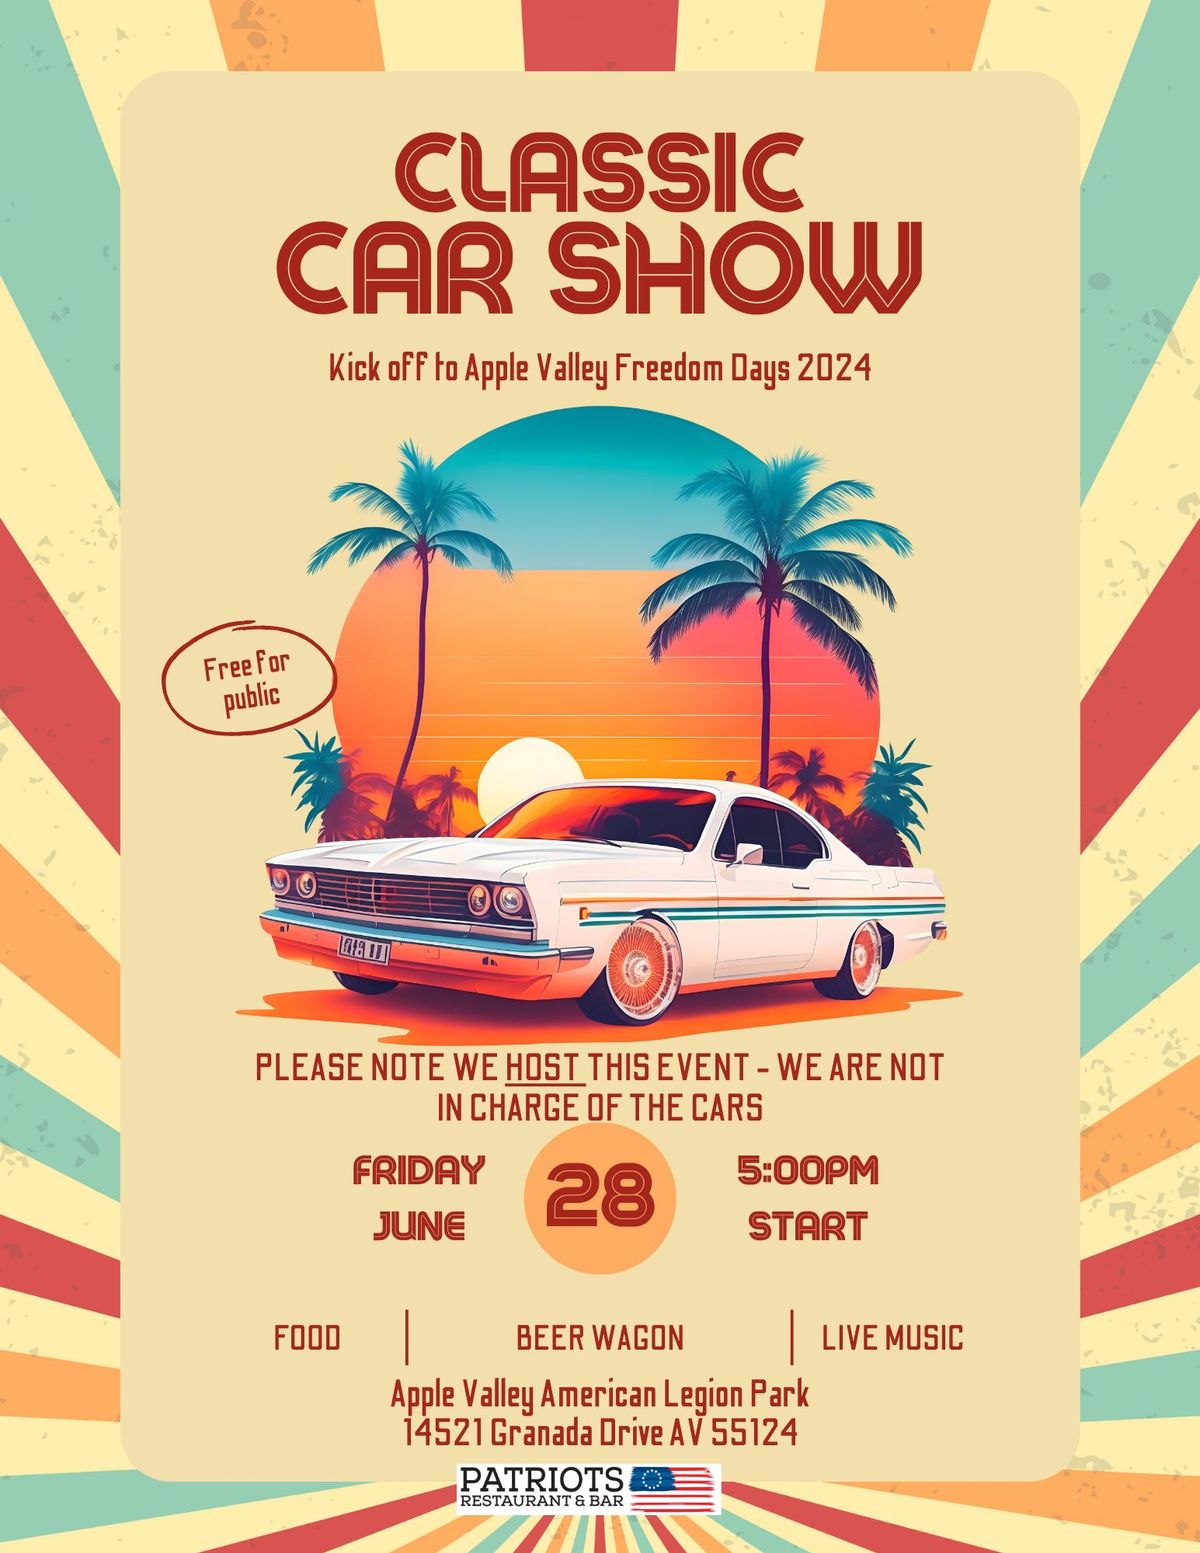 2024 APPLE VALLEY FREEDOM DAYS CAR SHOW